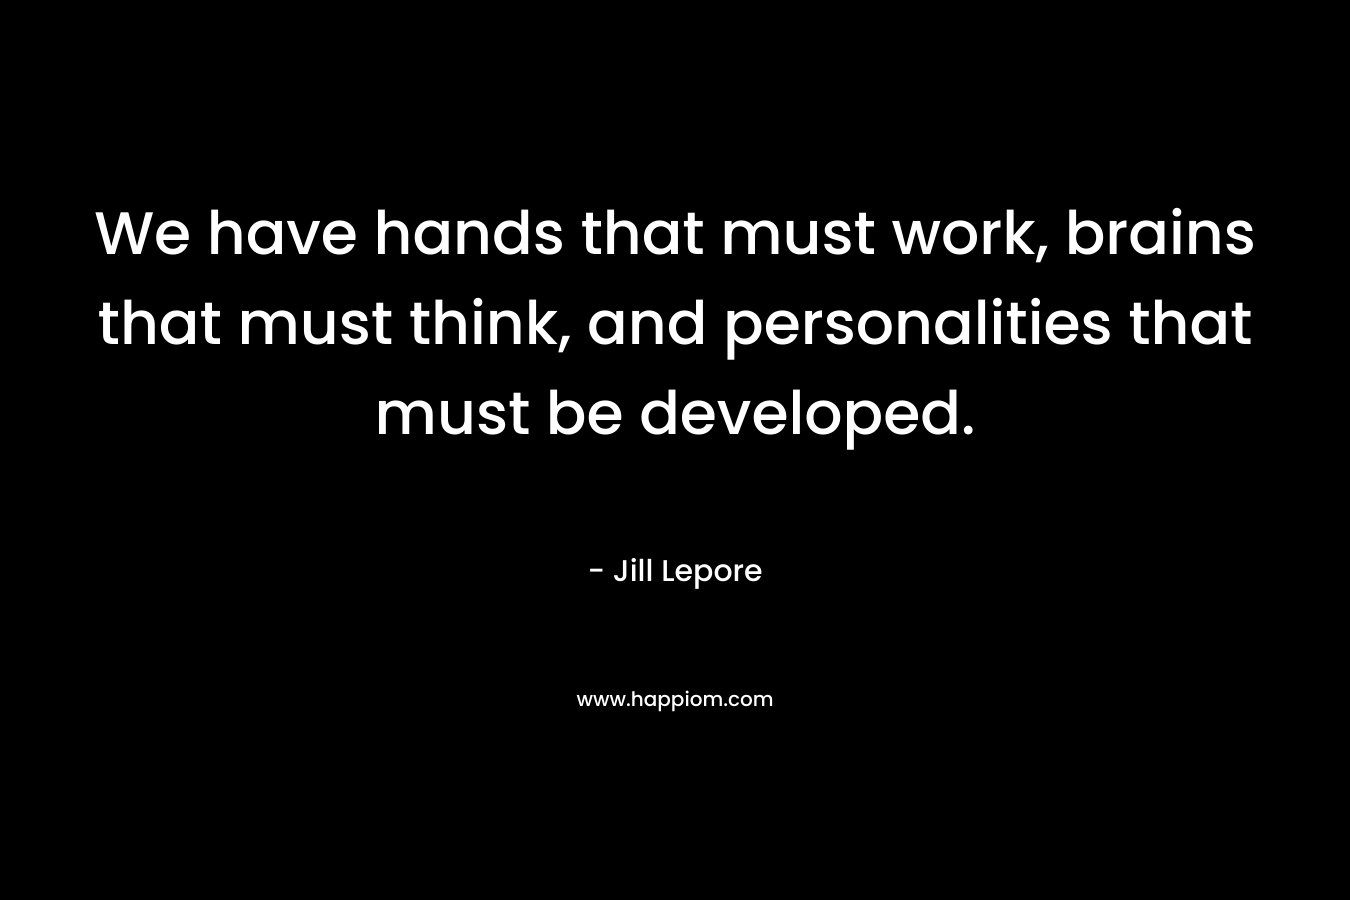 We have hands that must work, brains that must think, and personalities that must be developed.